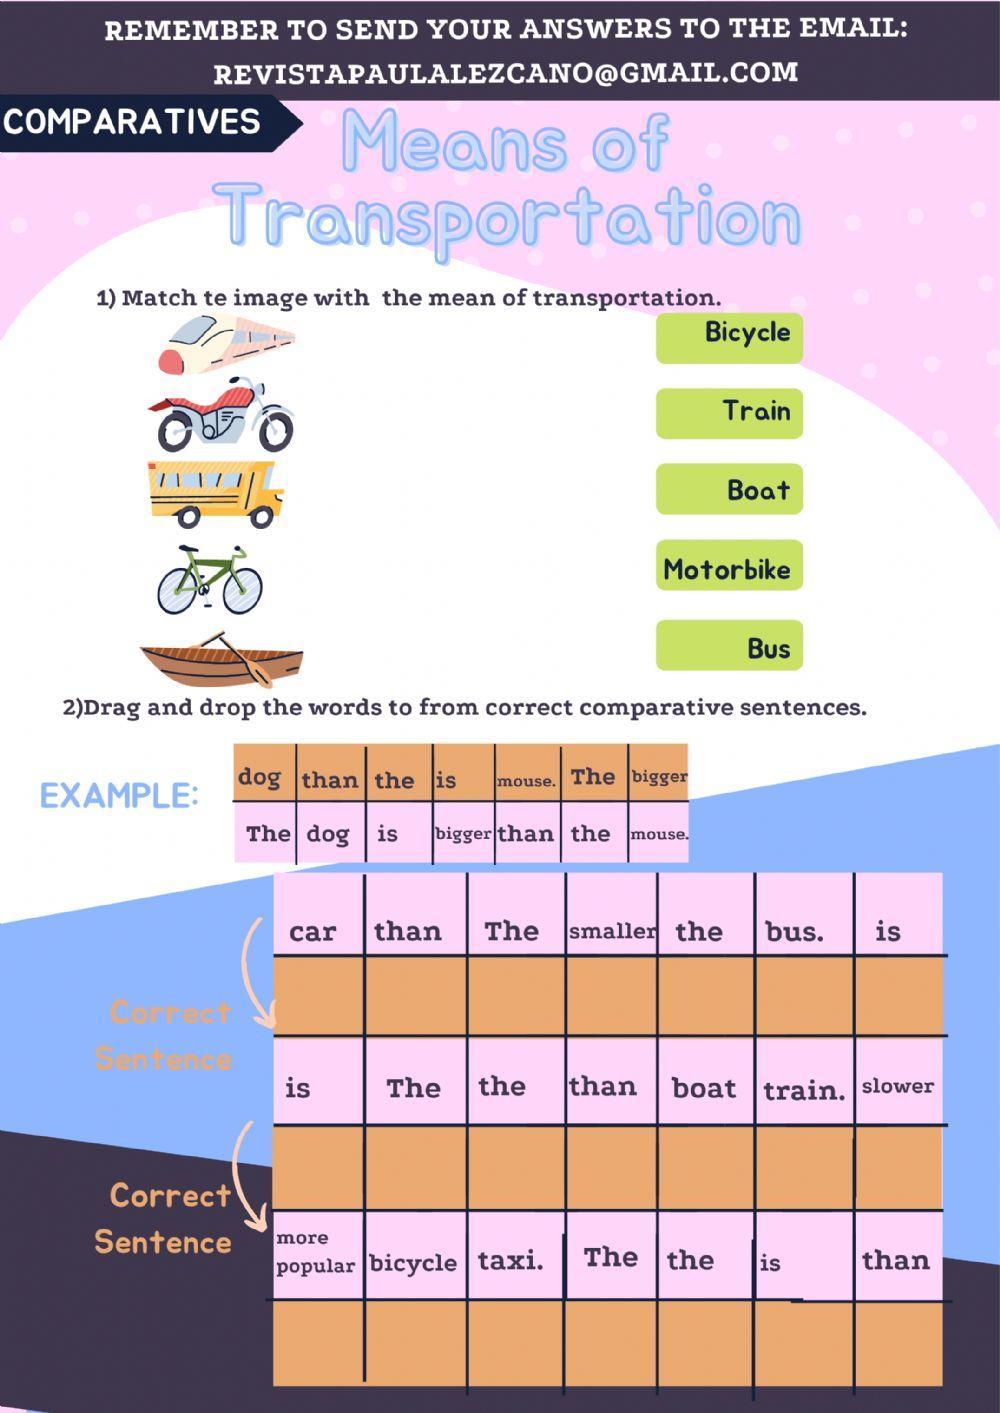 Means of Transportation - comparatives